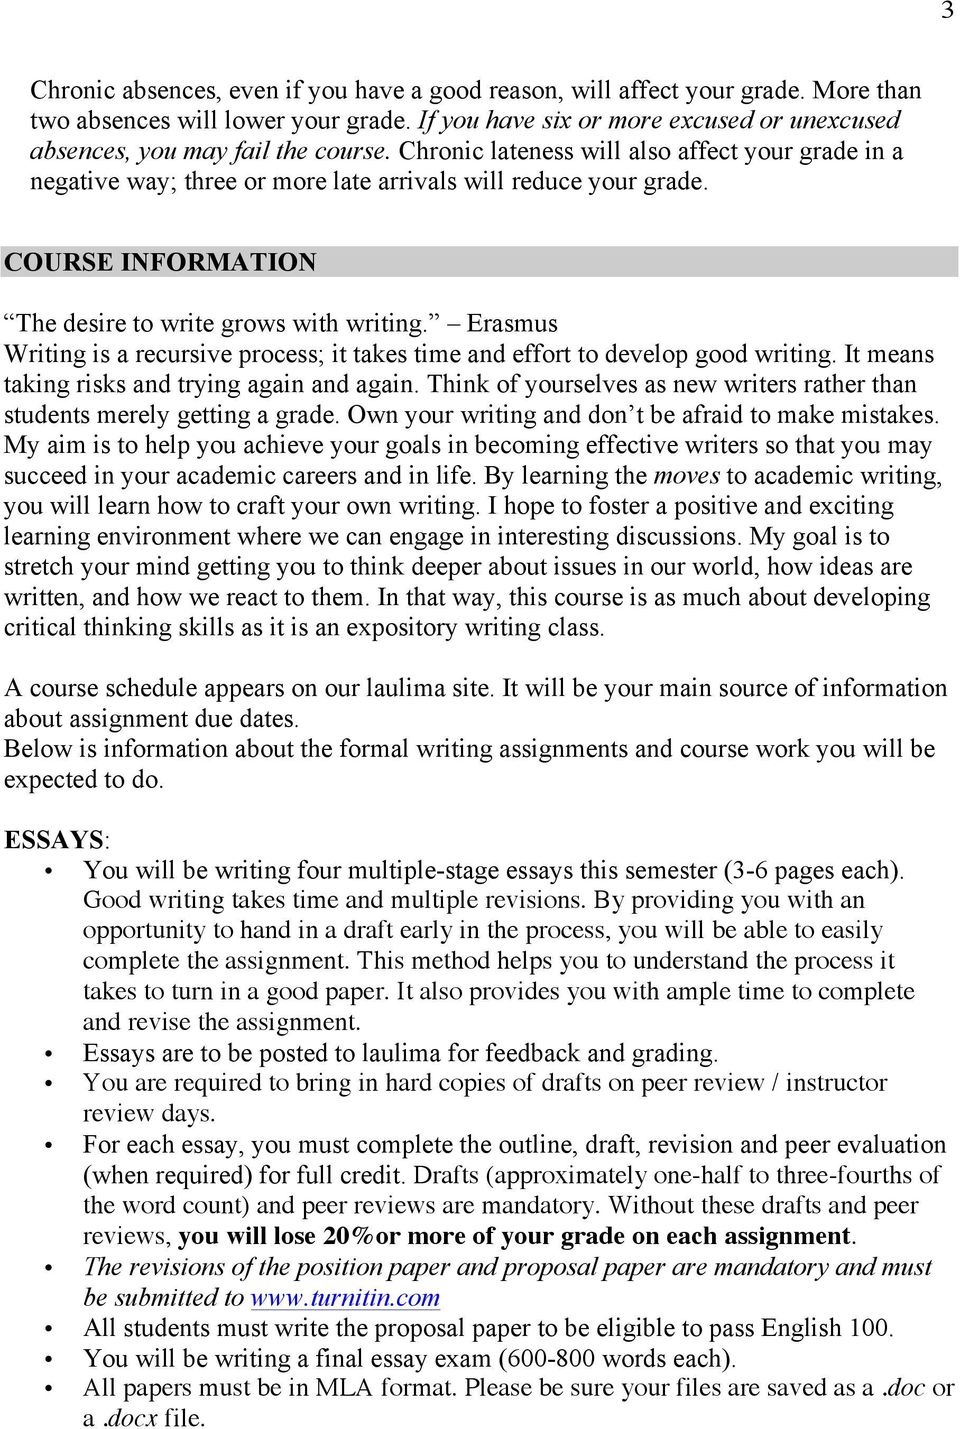 COURSE INFORMATION The desire to write grows with writing. Erasmus Writing is a recursive process; it takes time and effort to develop good writing. It means taking risks and trying again and again.